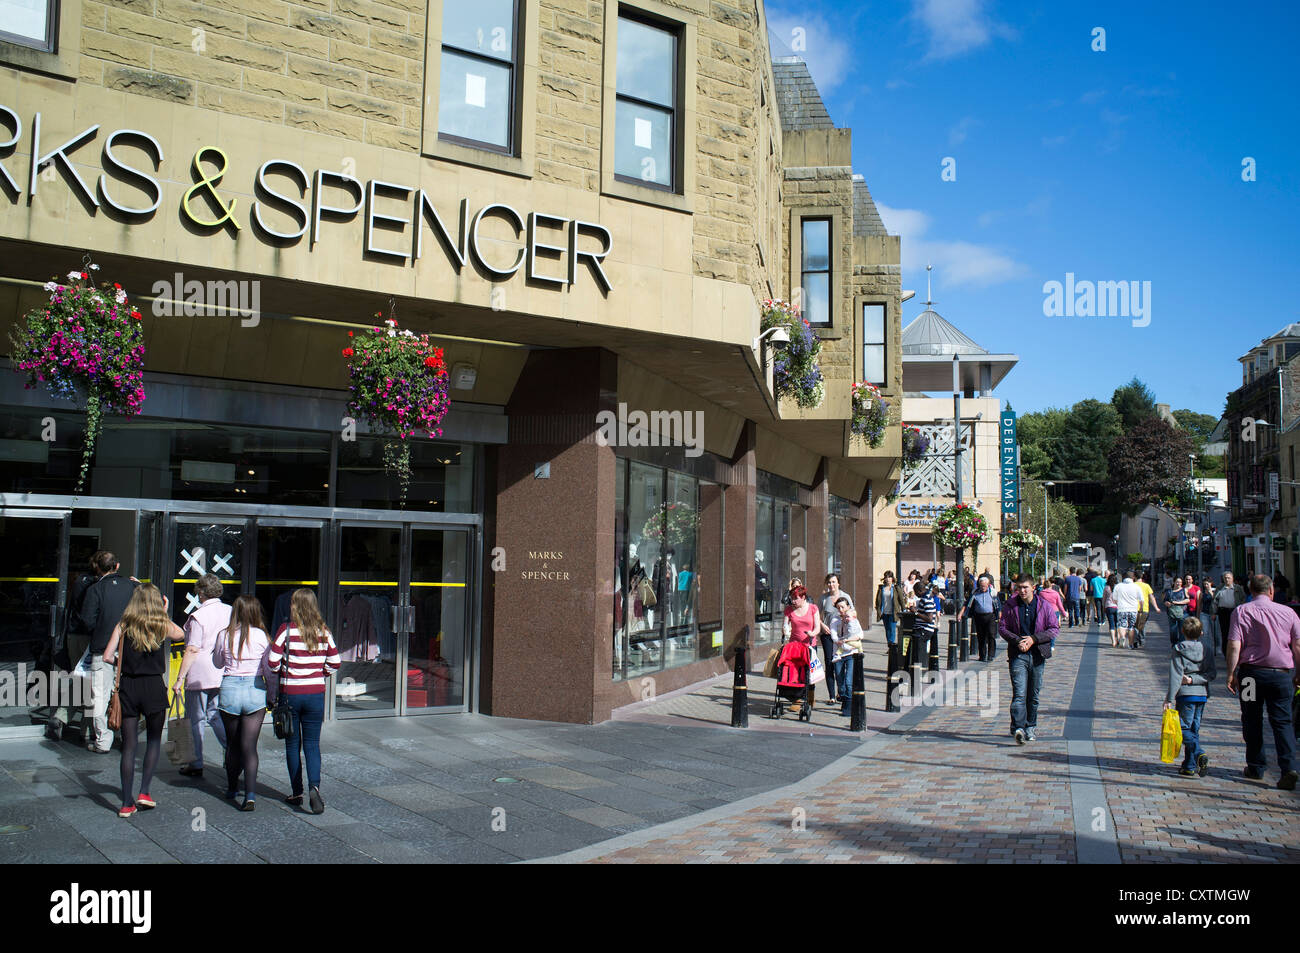 Dh INVERNESS INVERNESSSHIRE Mark und Spencer Eastgate Shopping Center City Stockfoto